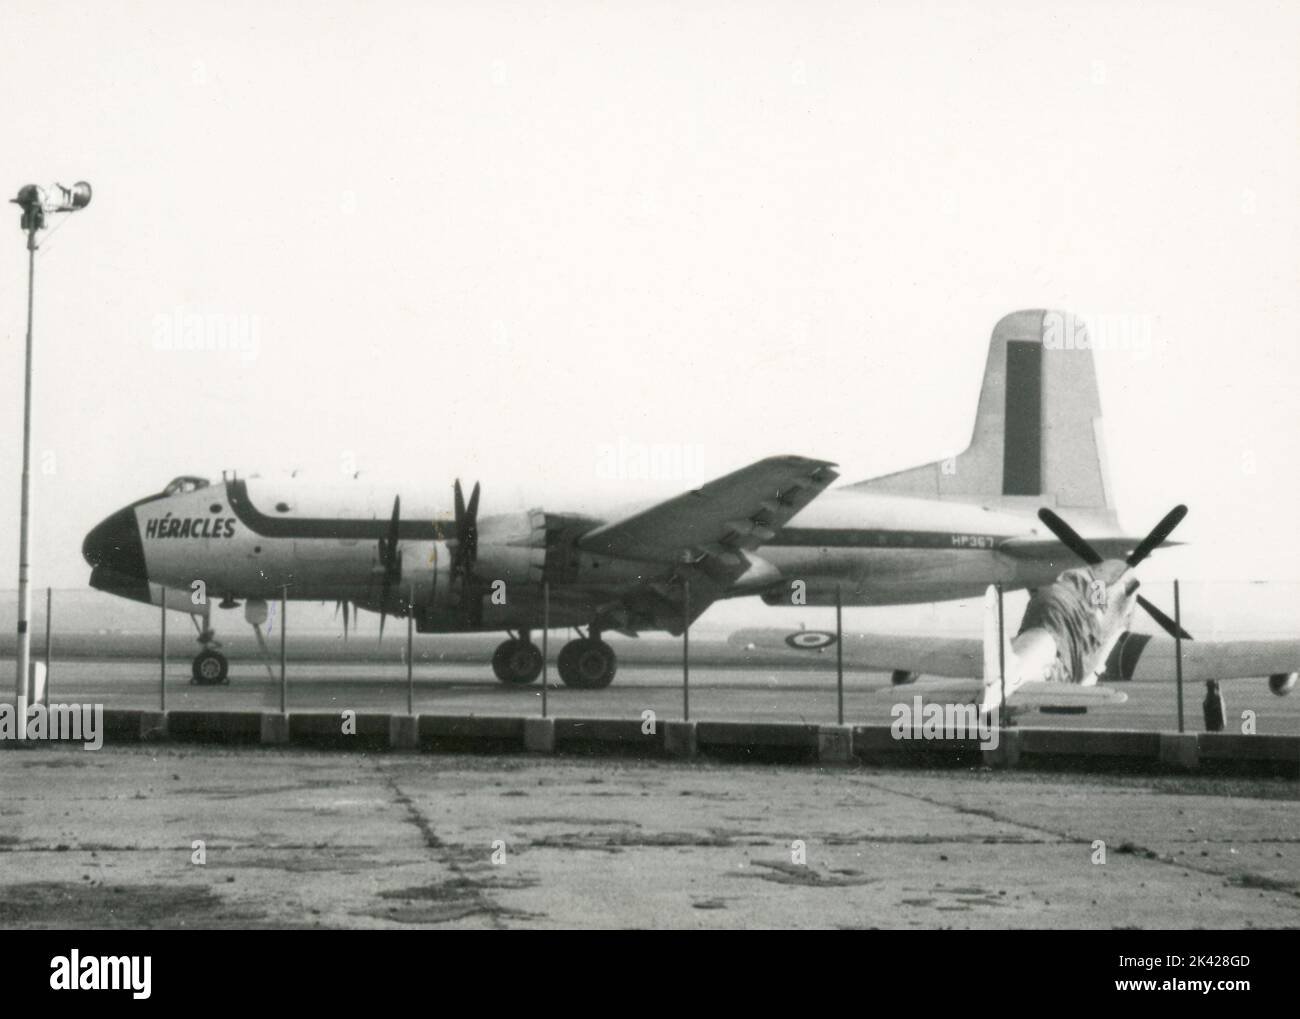 Heavyload transport aircraft Douglas C-74 Globemaster Heracles, Caselle Airport, Turin, Italy 1963 Stock Photo